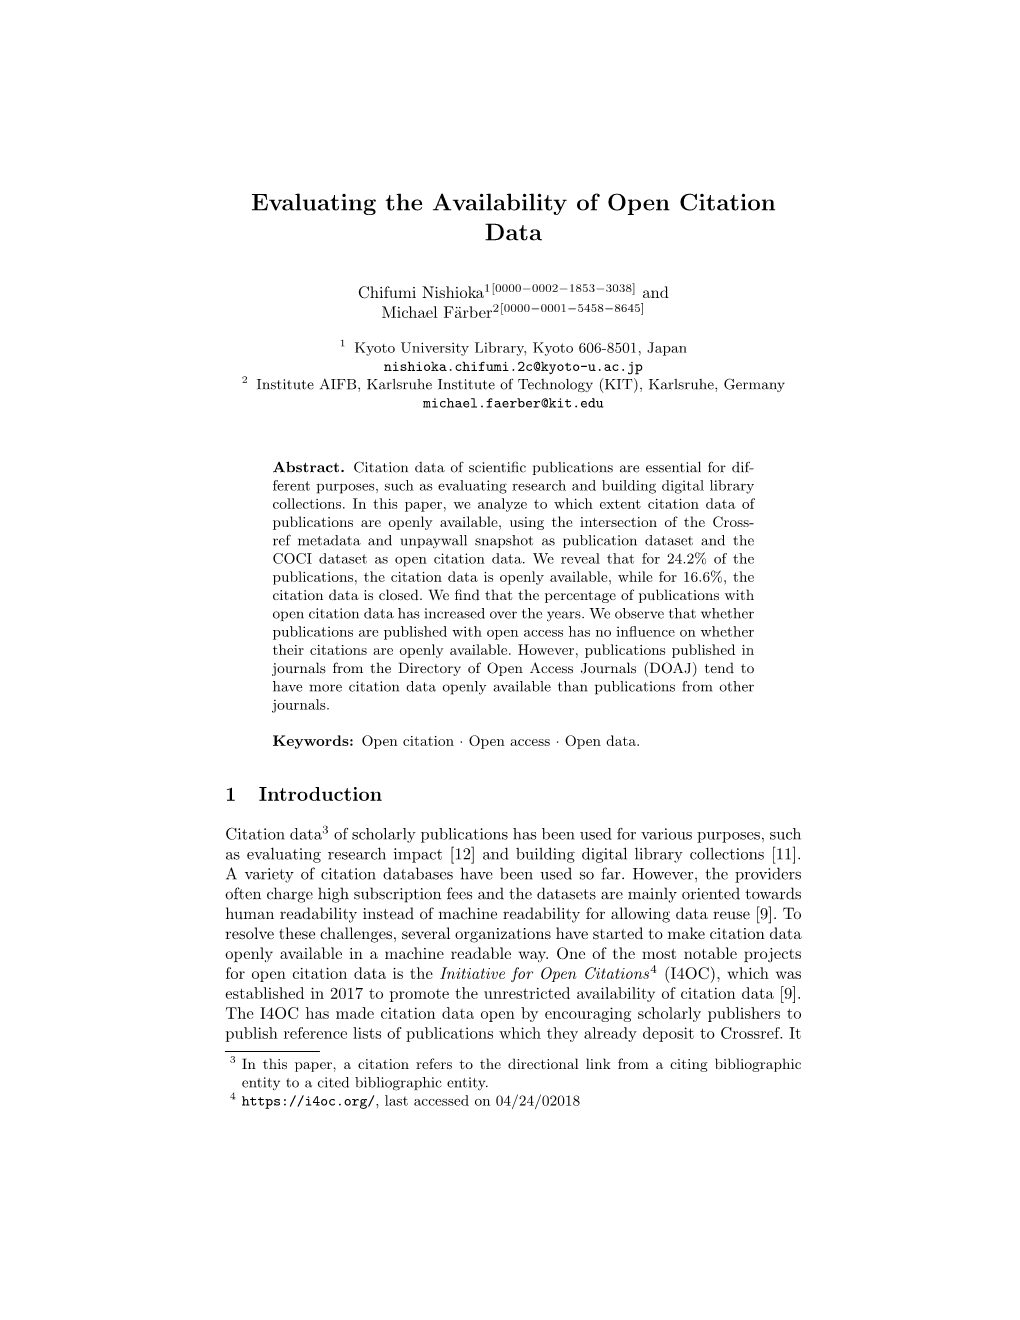 Evaluating the Availability of Open Citation Data